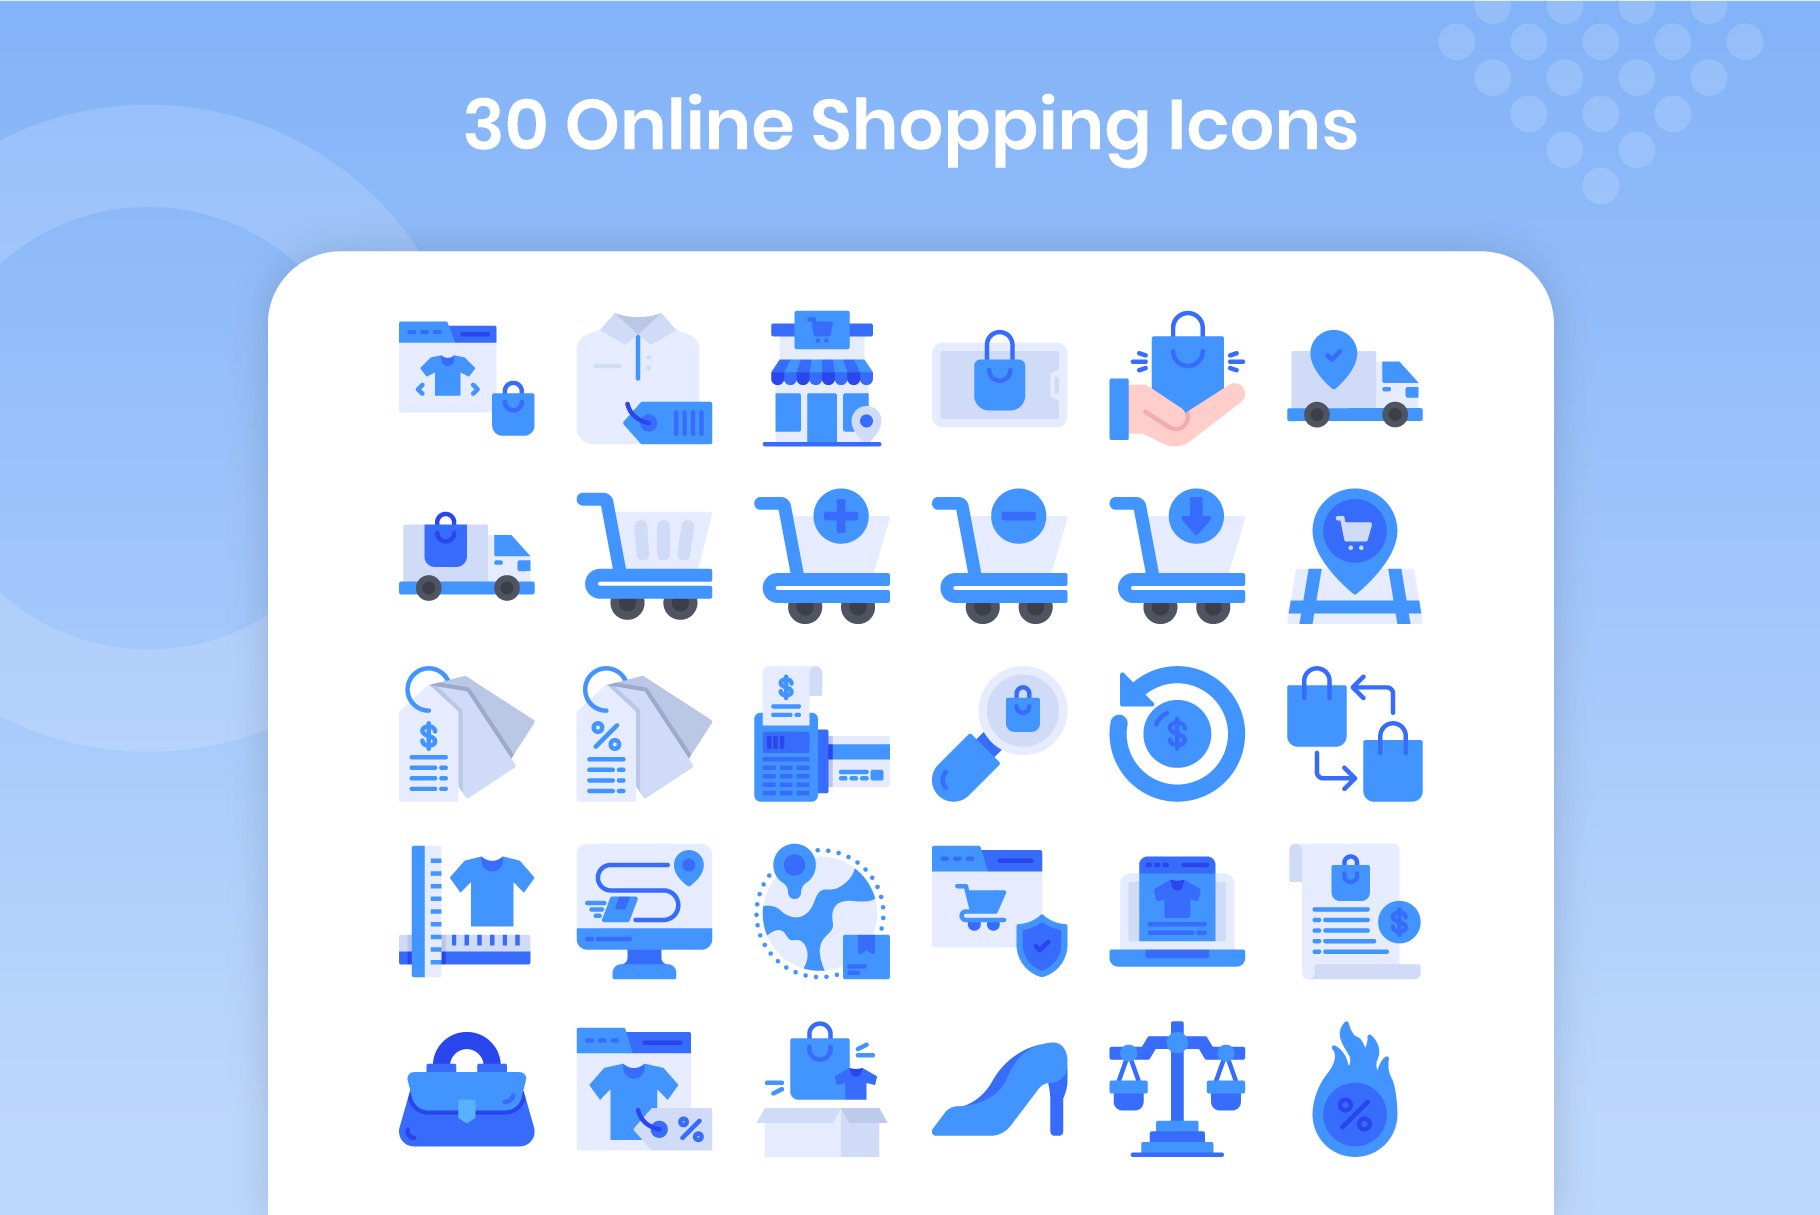 30 Online Shopping Icons Set - Flat preview image.